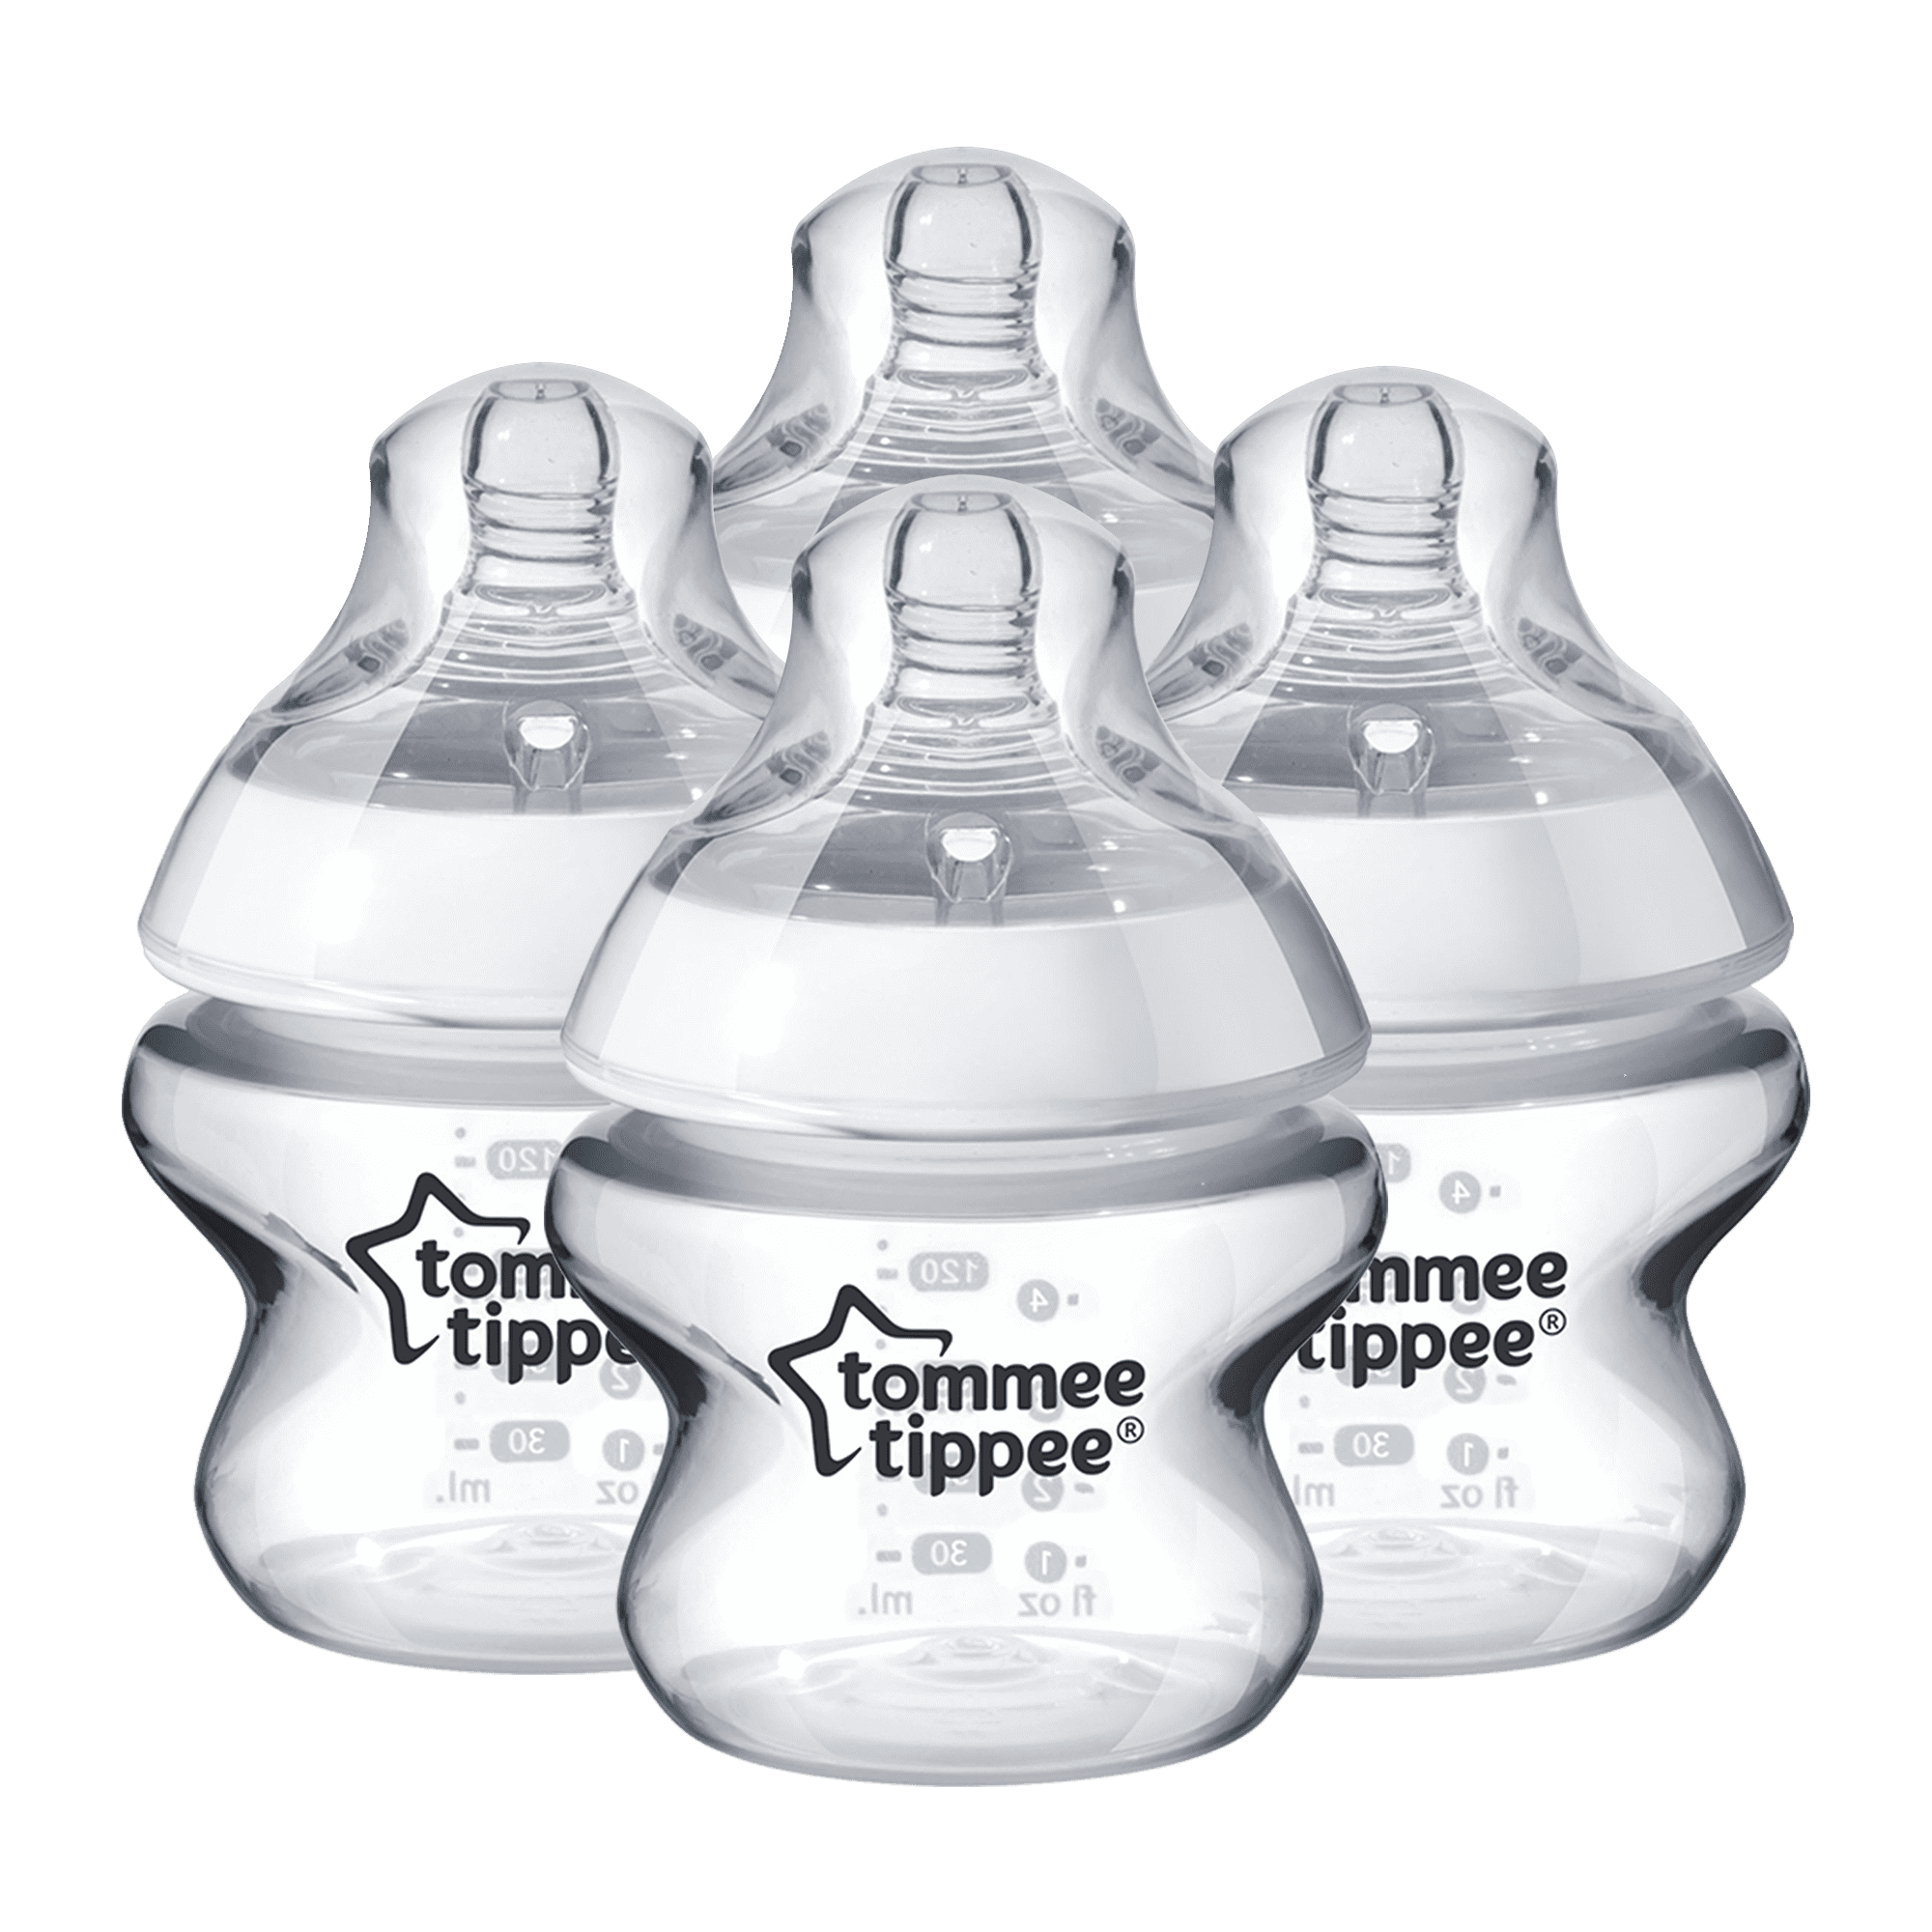 Explore our large variety of products with Tommee Tippee Closer to